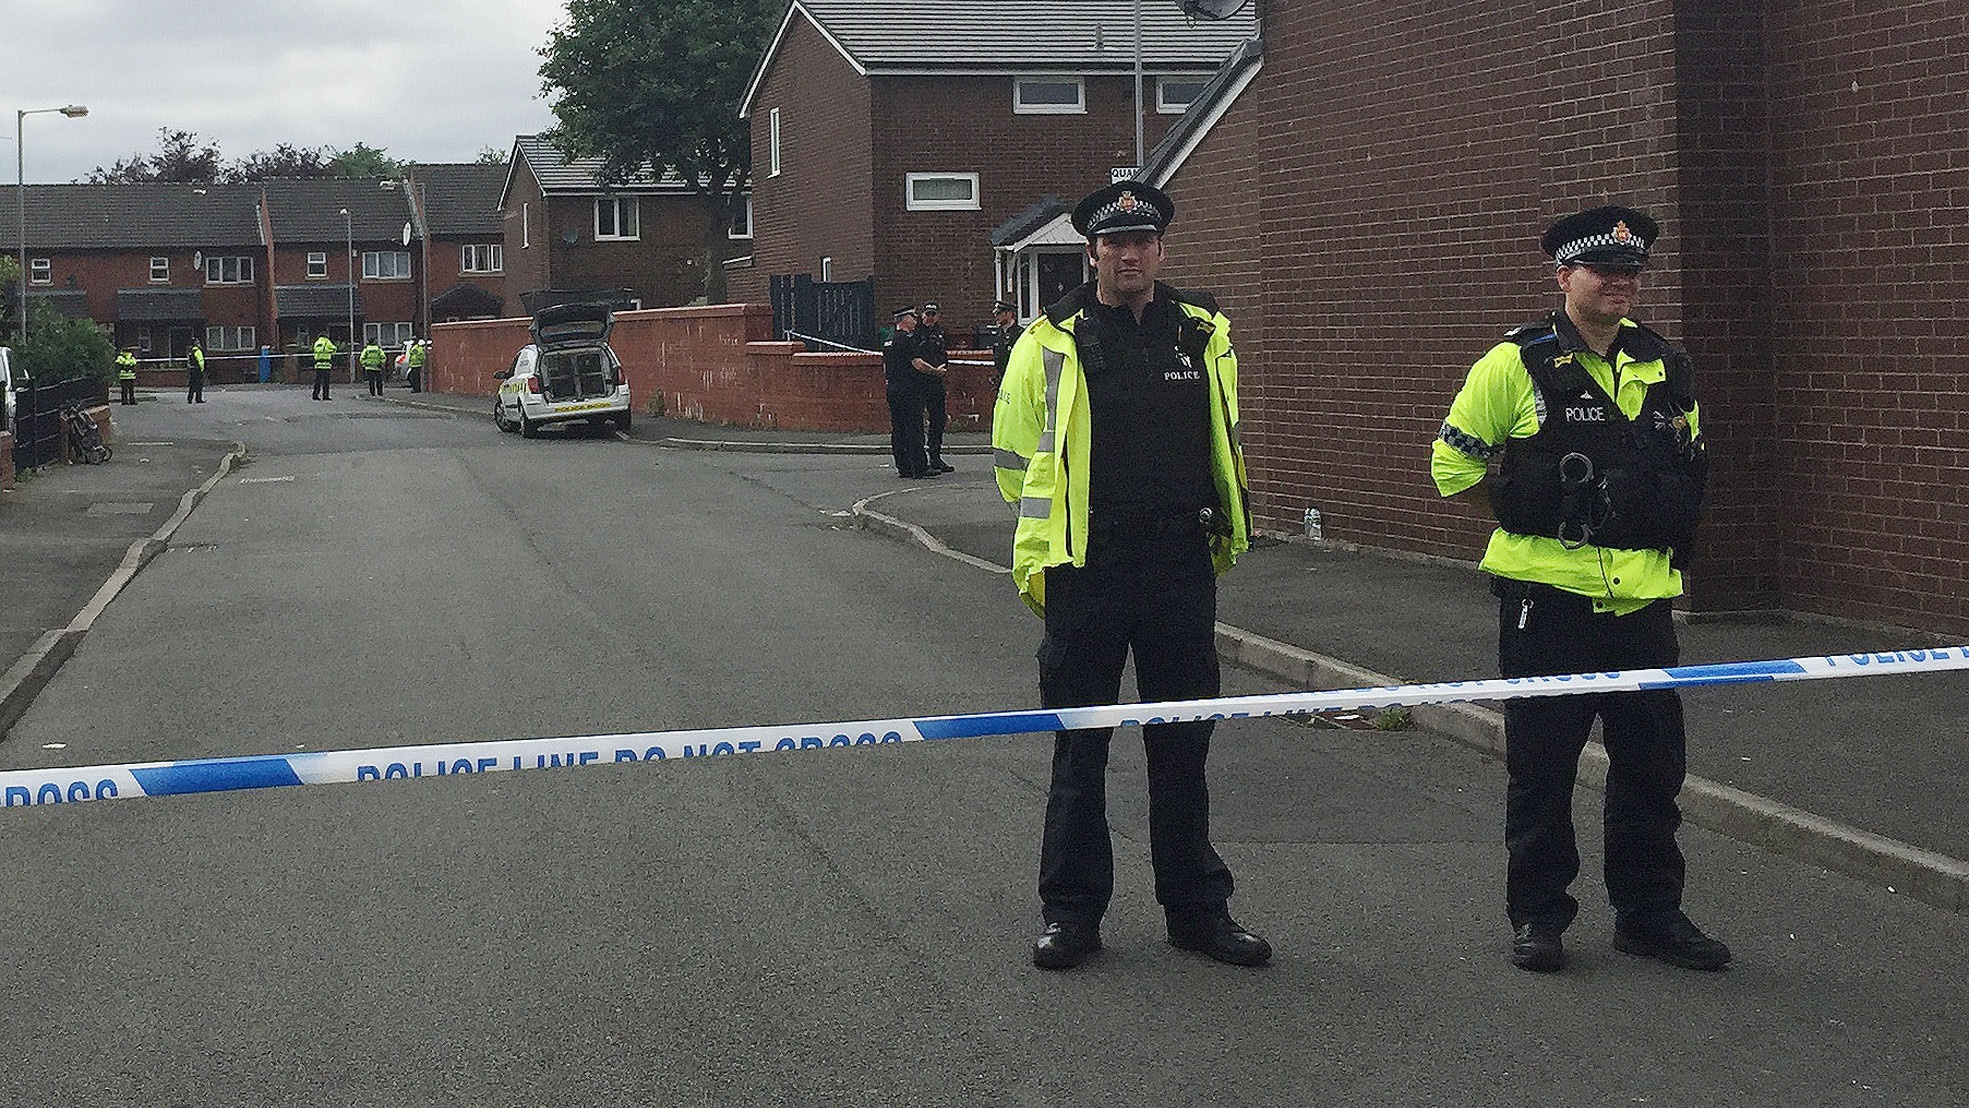 Further arrest made by police investigating Manchester atrocity - Warrington Guardian